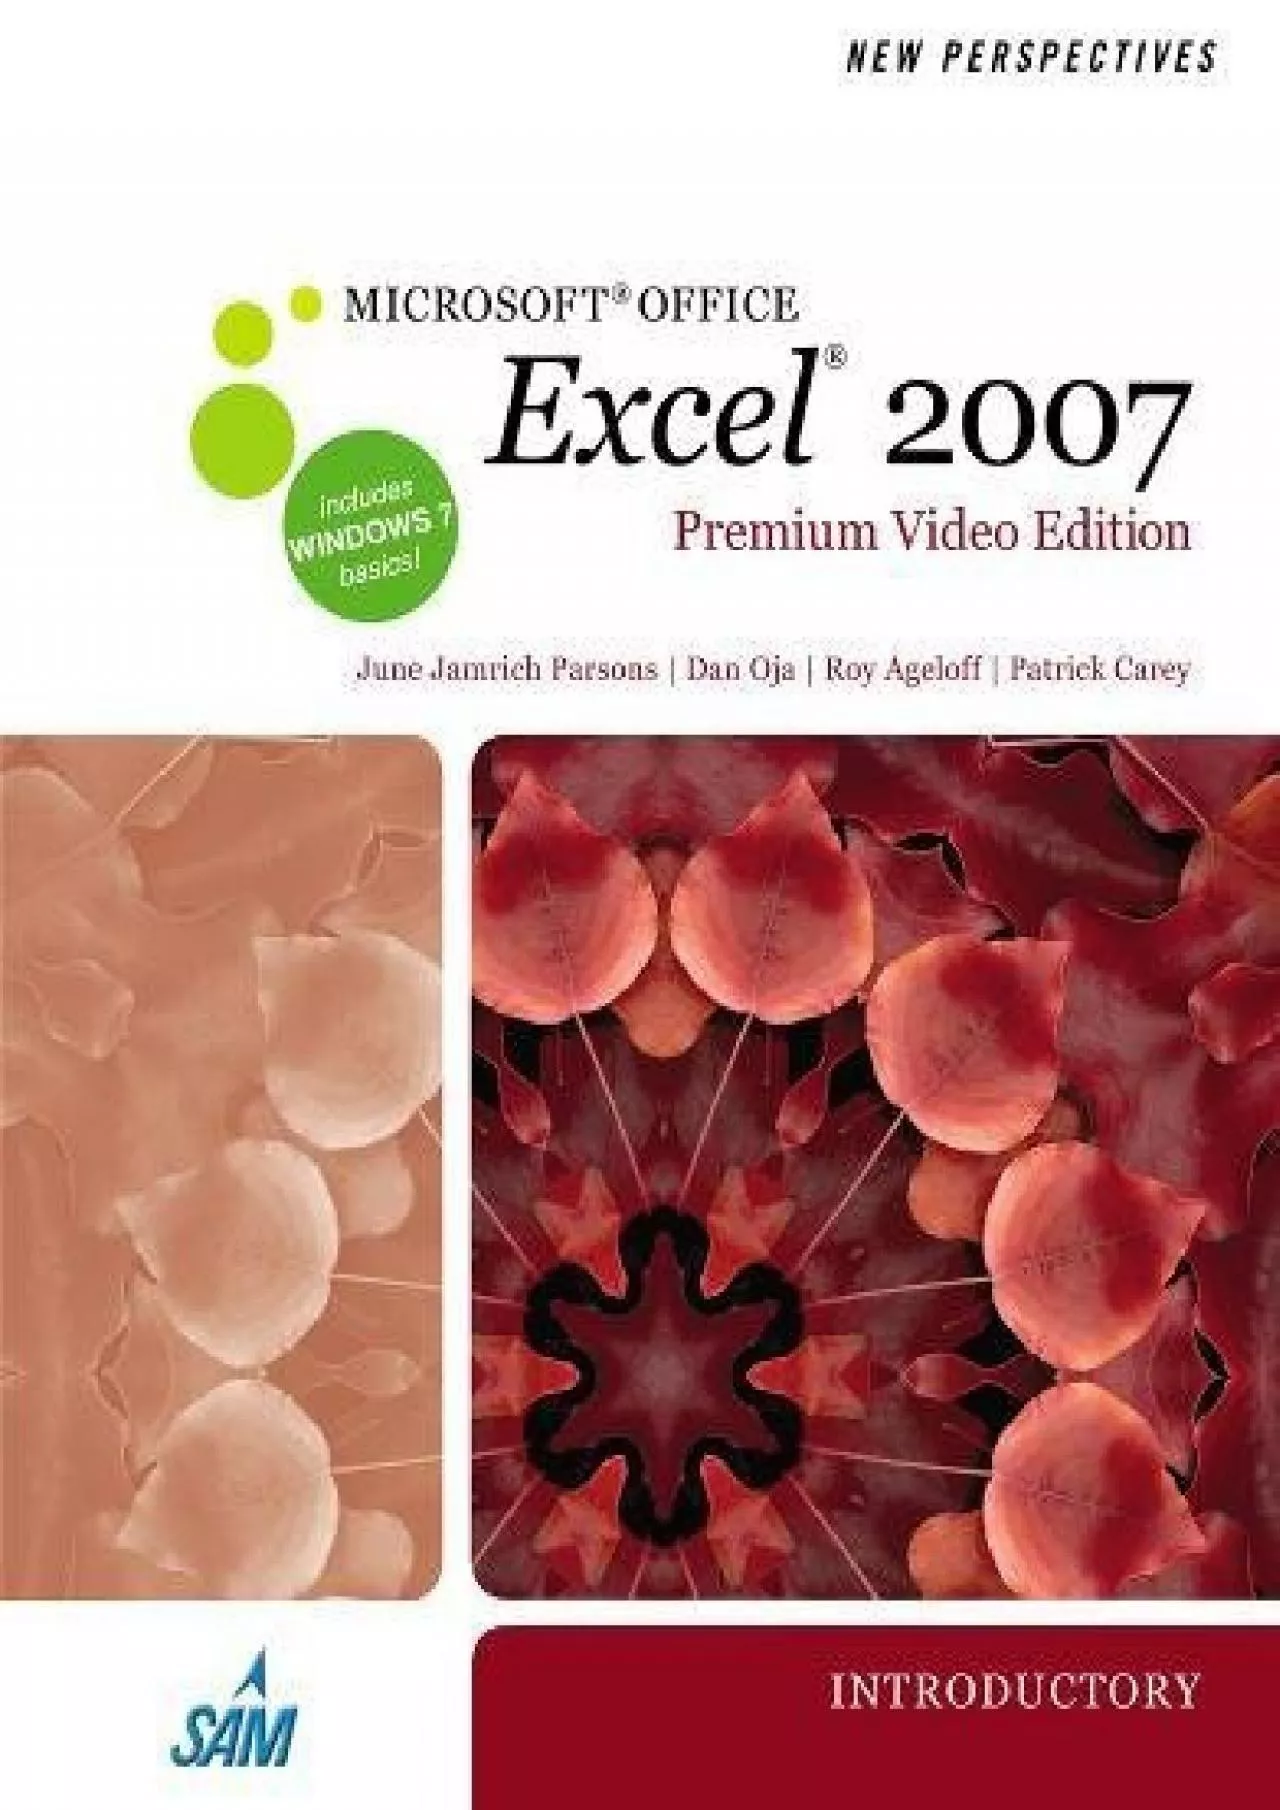 (BOOS)-New Perspectives on Microsoft Office Excel 2007, Introductory, Premium Video Edition